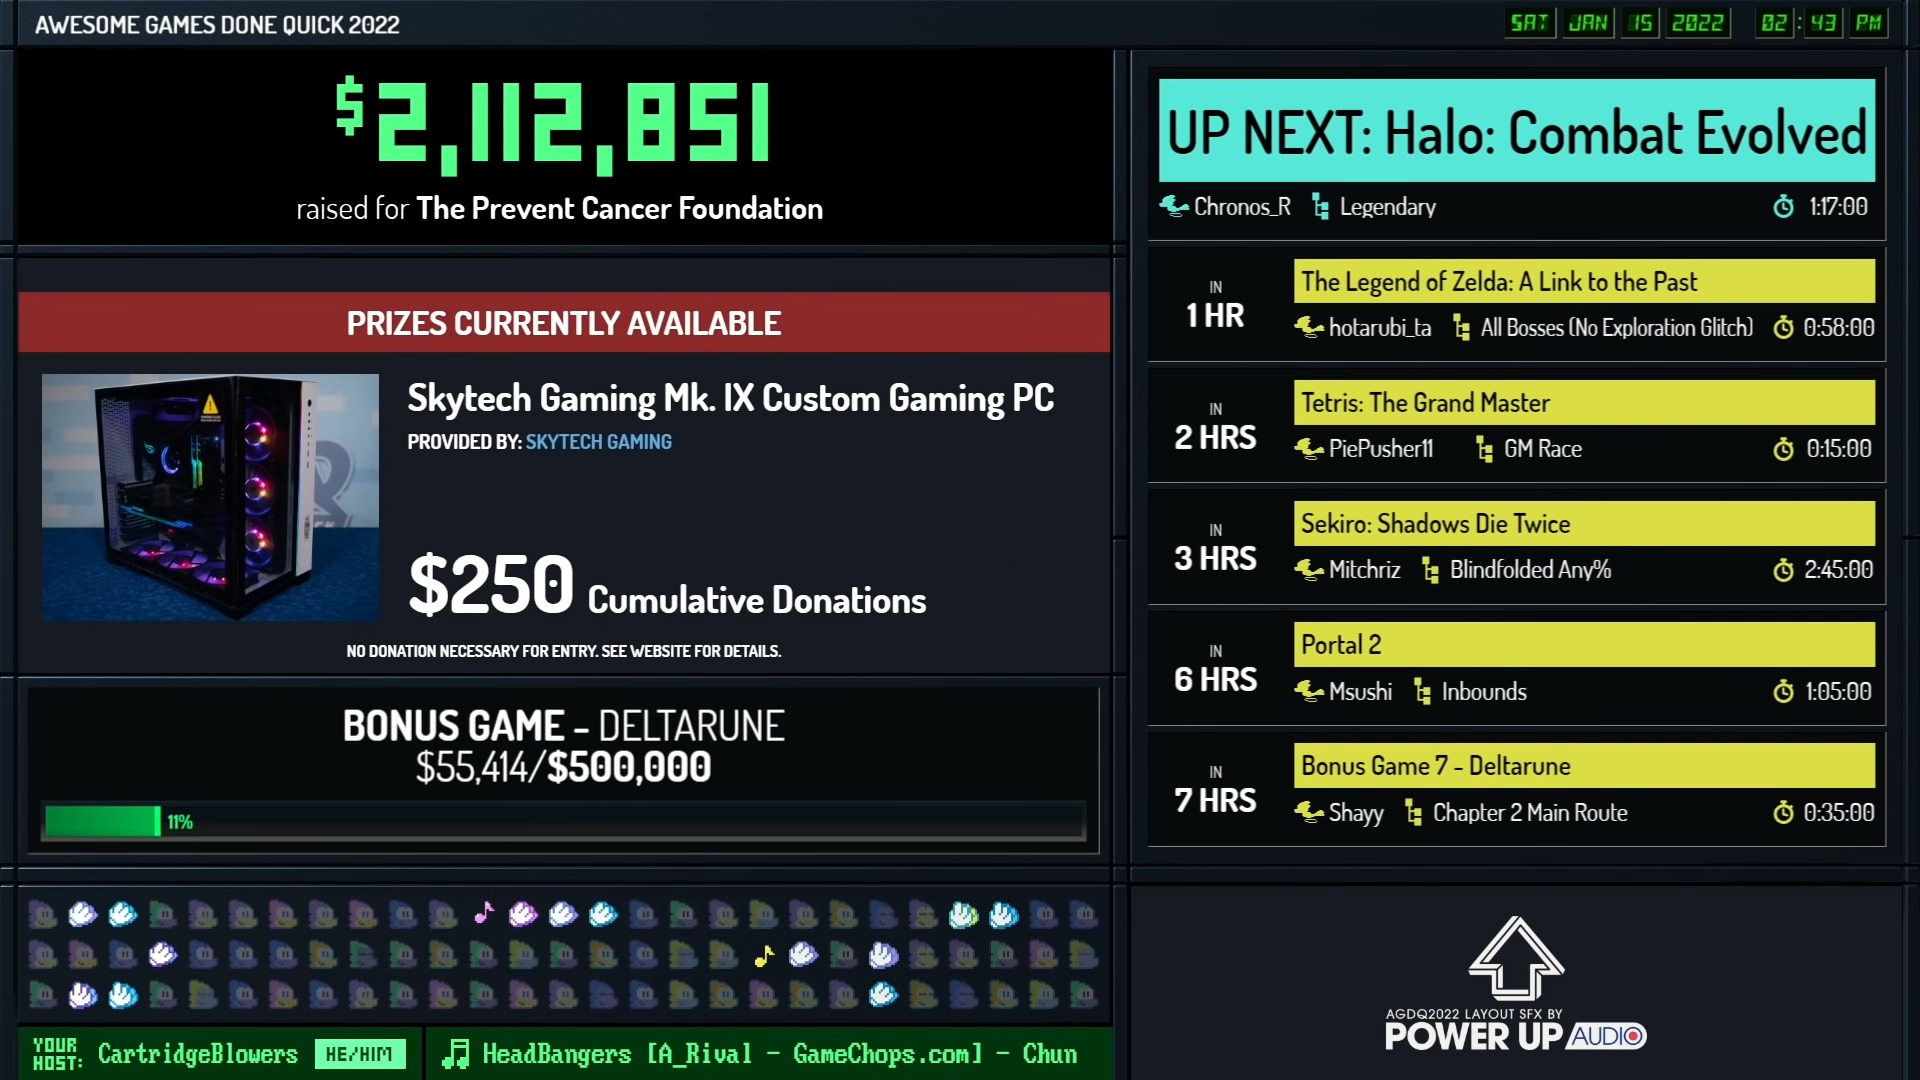 Screenshot of a GDQ broadcast showing the break screen, displaying the currently raised total for charity, prizes available, upcoming incentives, and a schedule of upcoming speedruns.